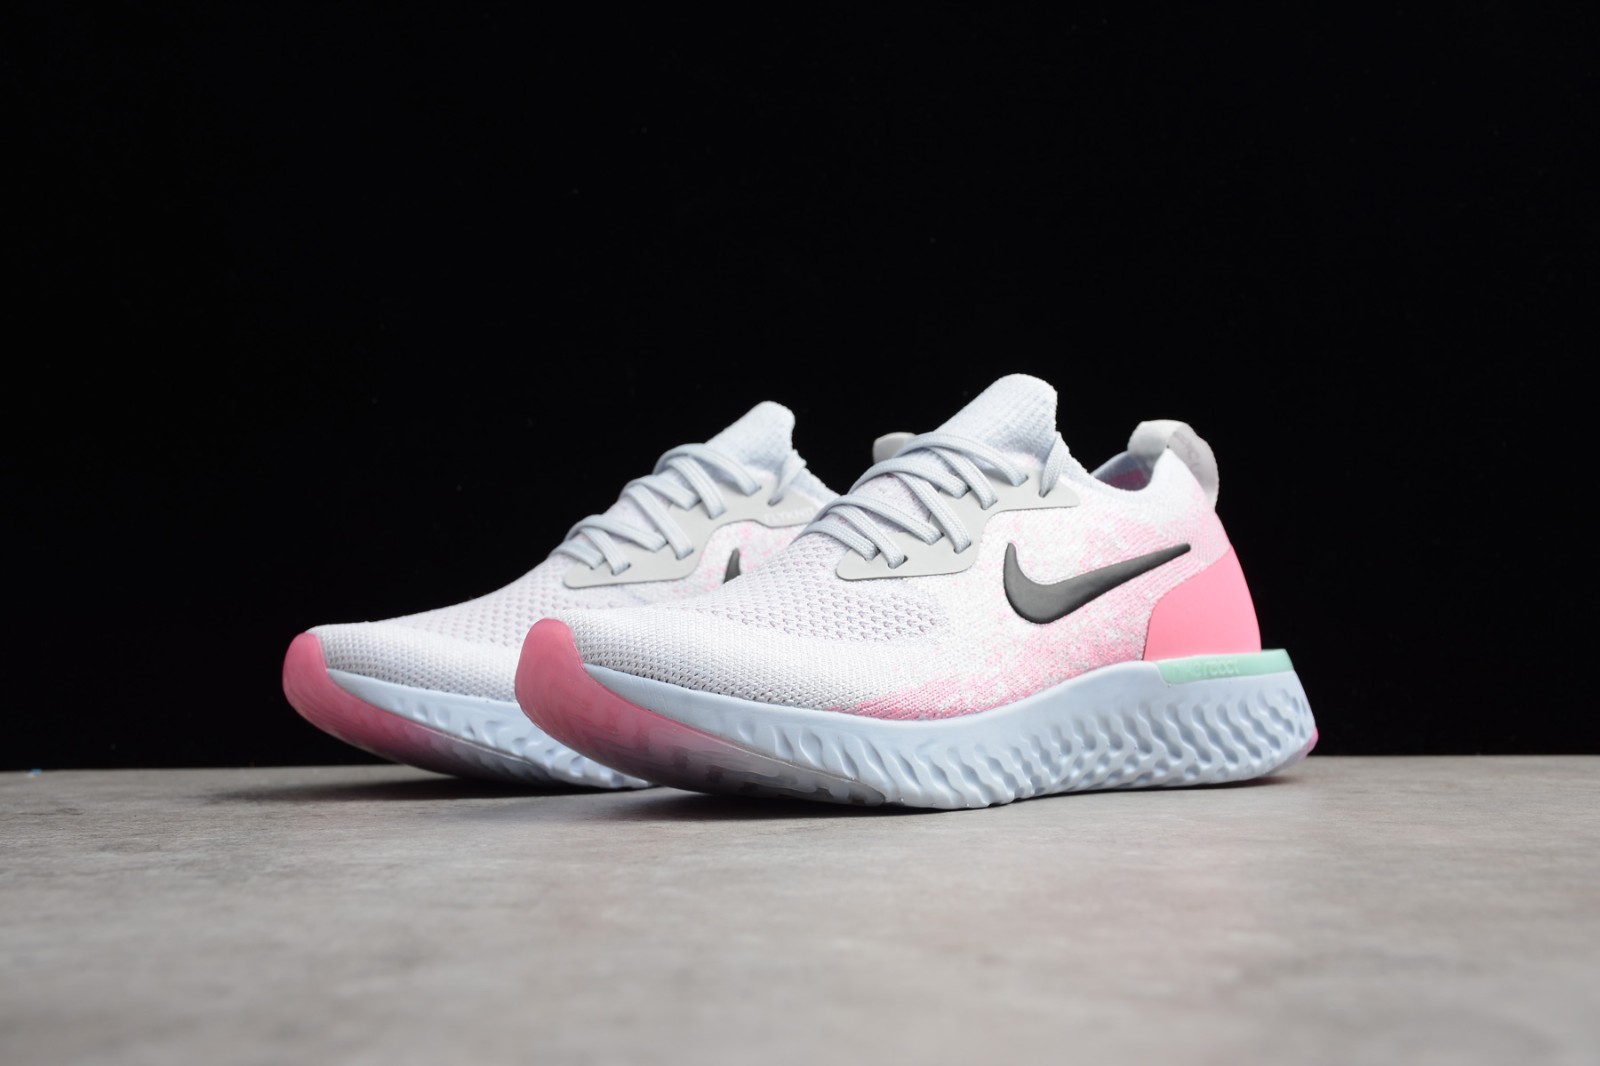 nike backpacks for cheap tickets - Womens Nike Epic React Pink Pure Platinum Hydrogen Blue Pink Beam Black AQ0067 007 - MultiscaleconsultingShops